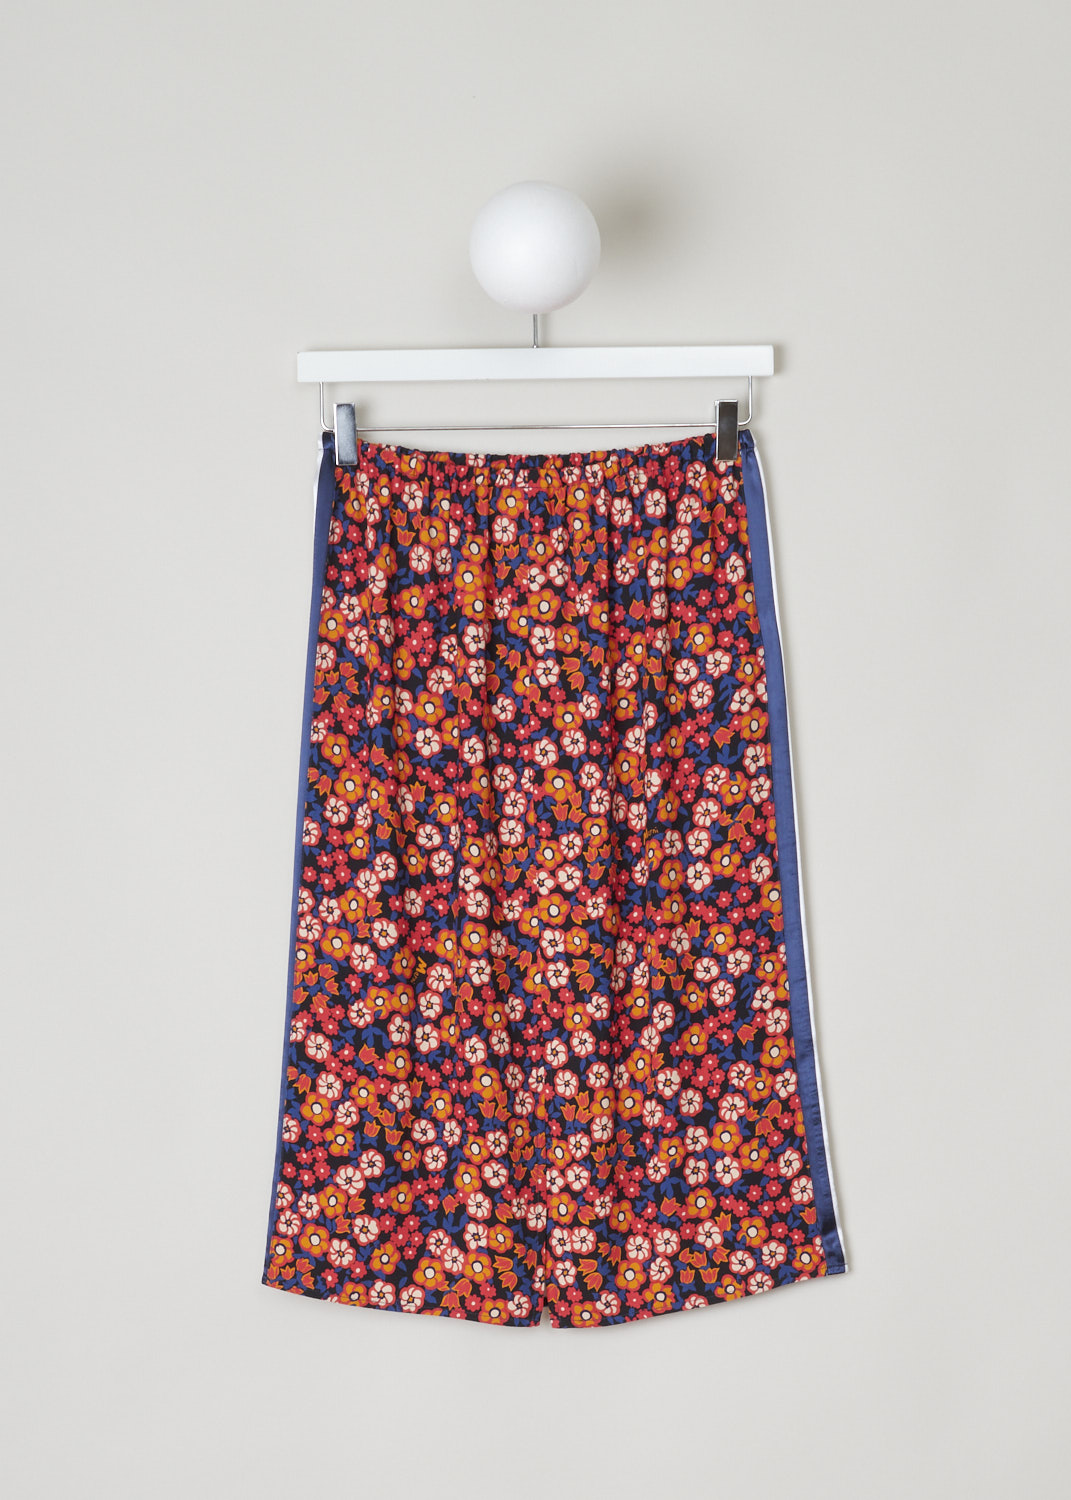 Marni, Red and blue floral pencil skirt, GOMA0348Q0_UTV823_PGN99, red blue white, back, Red pencil skirt embellished with a red and blue floral design, the side seam of this skirt comes adorned with blue and white stripes along the whole length. The closure method of this skirt comes win the form of an elastic waistband.